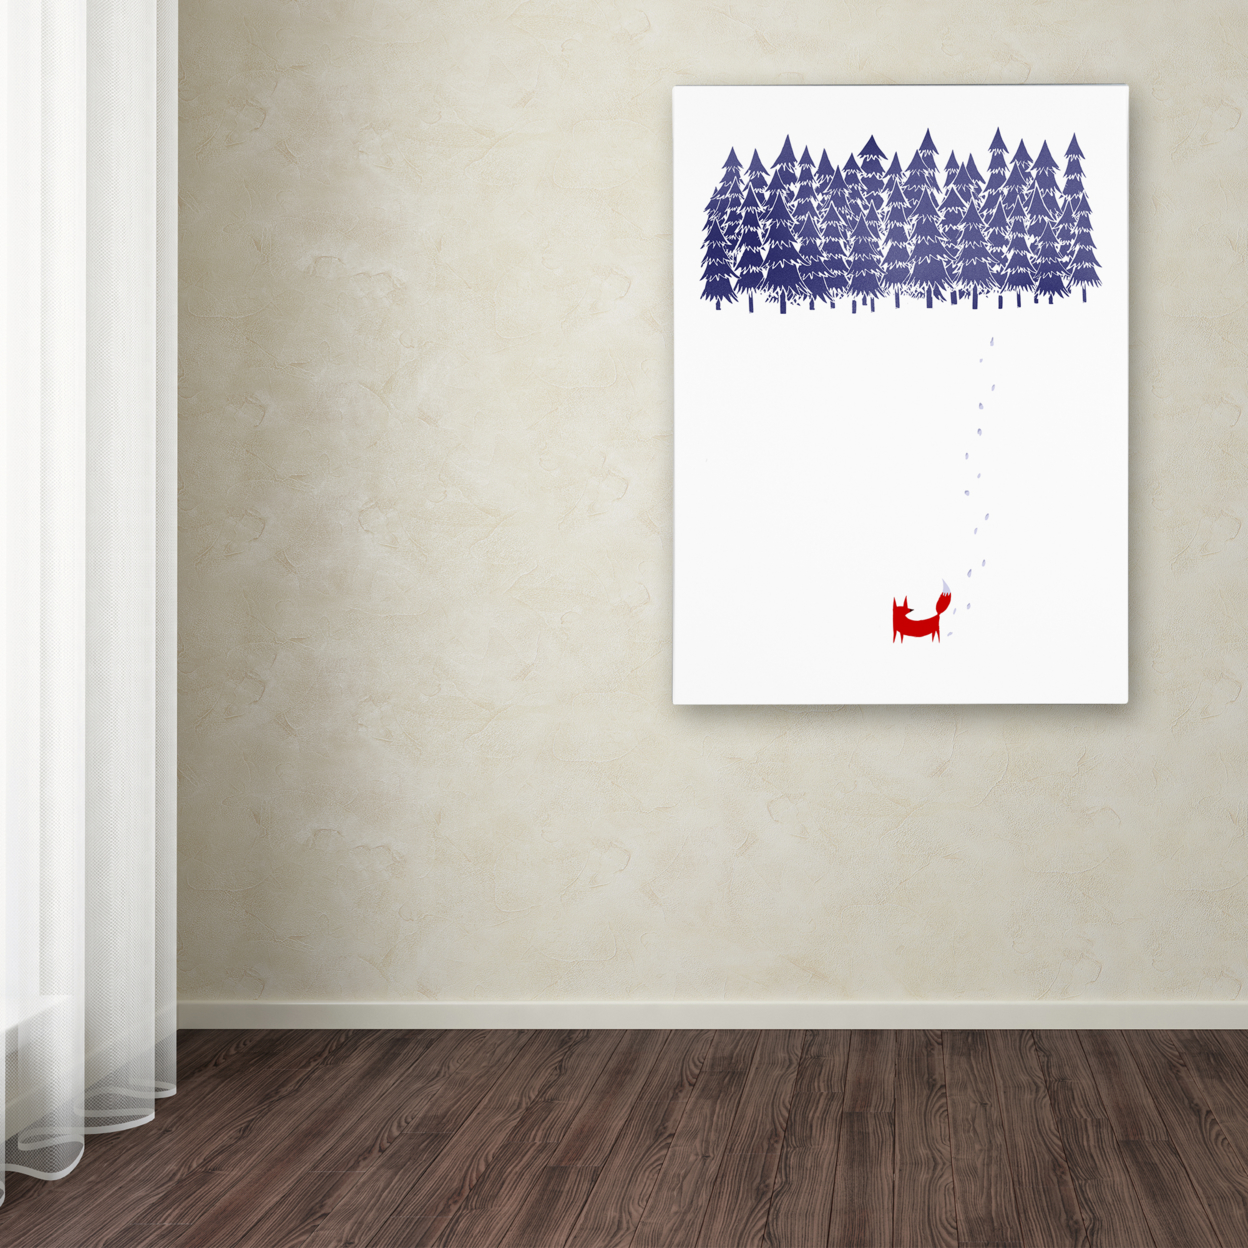 Robert Farkas 'Alone In The Forest' Canvas Wall Art 35 X 47 Inches